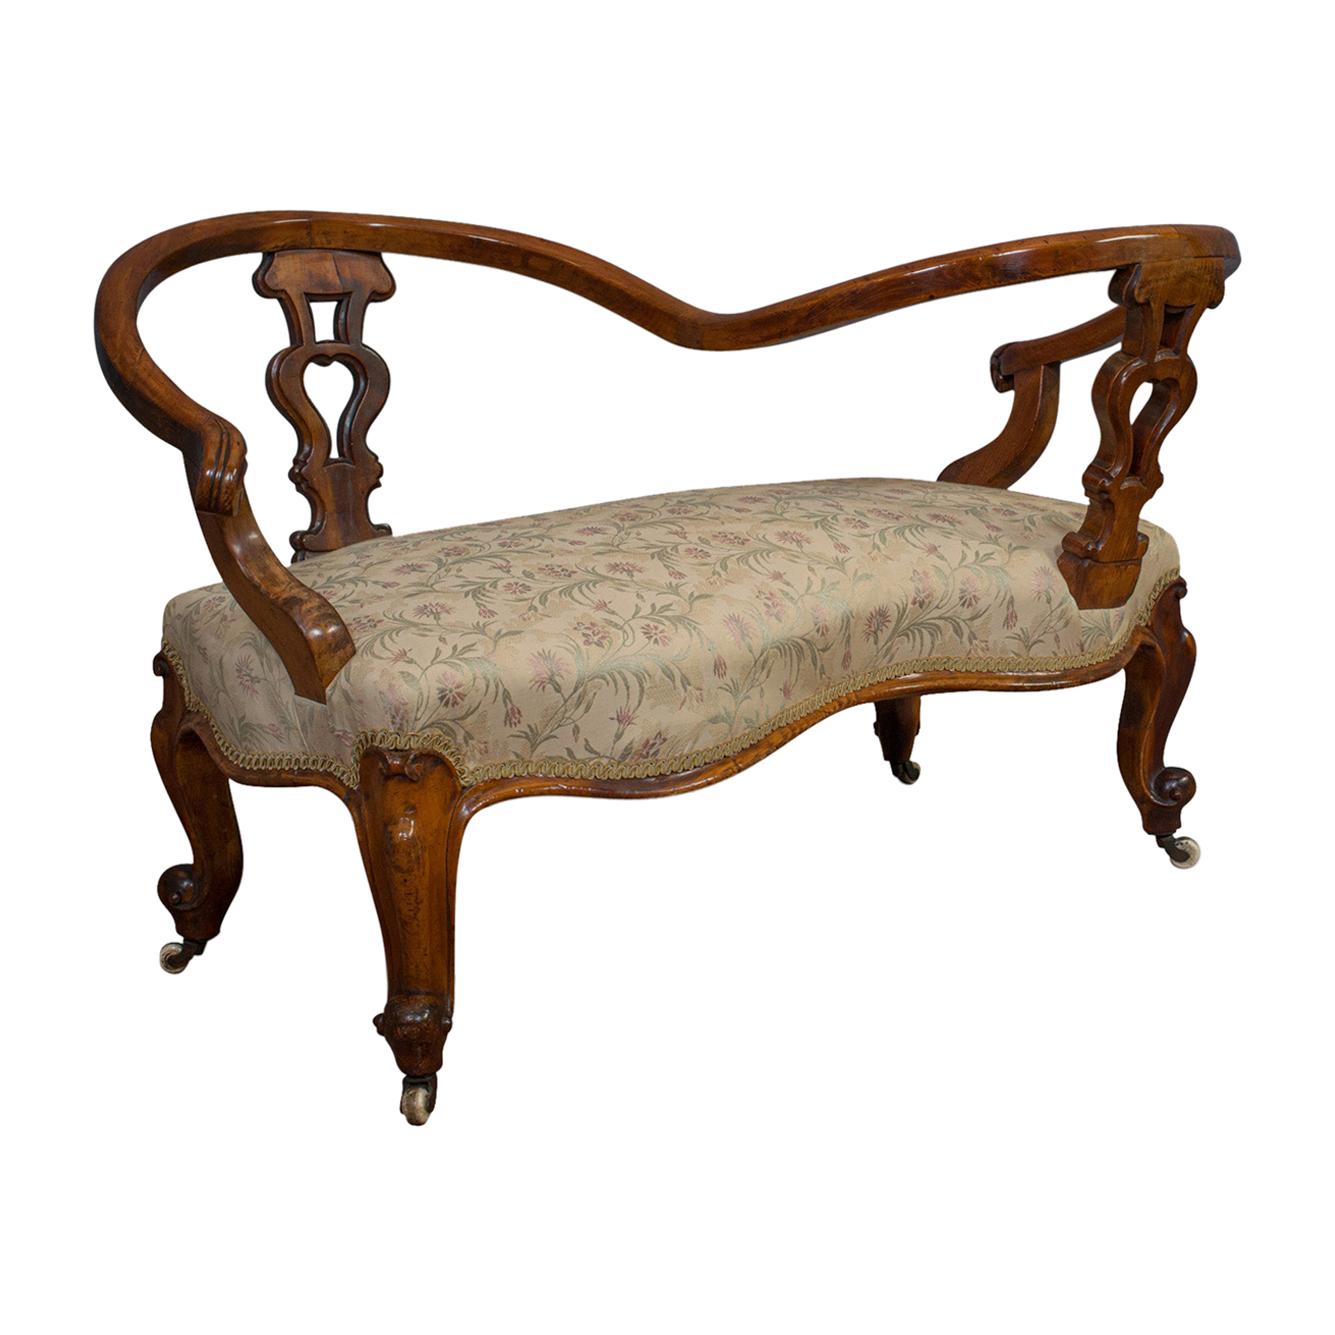 Antique Conversation Sofa, English, Fruitwood, Loveseat, Tete-a-Tete, Courting